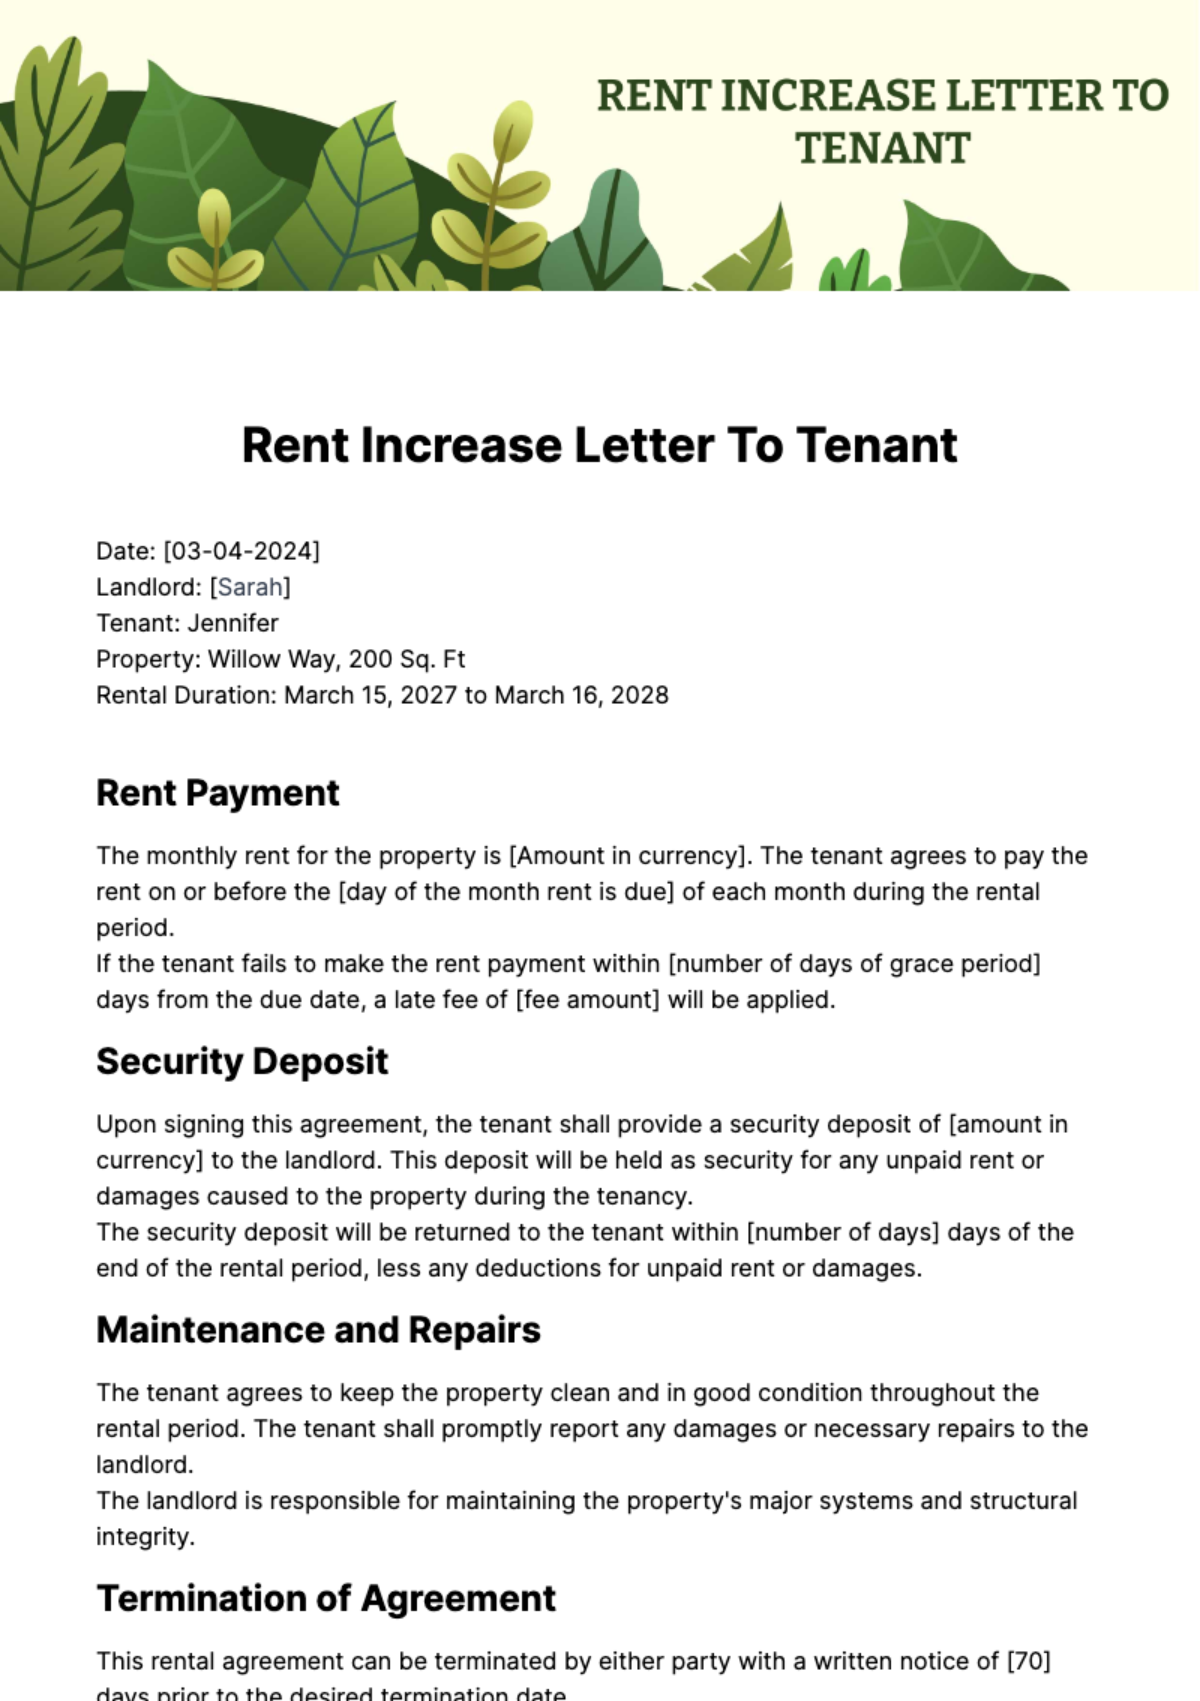 Free Rent Increase Letter to Tenant Template